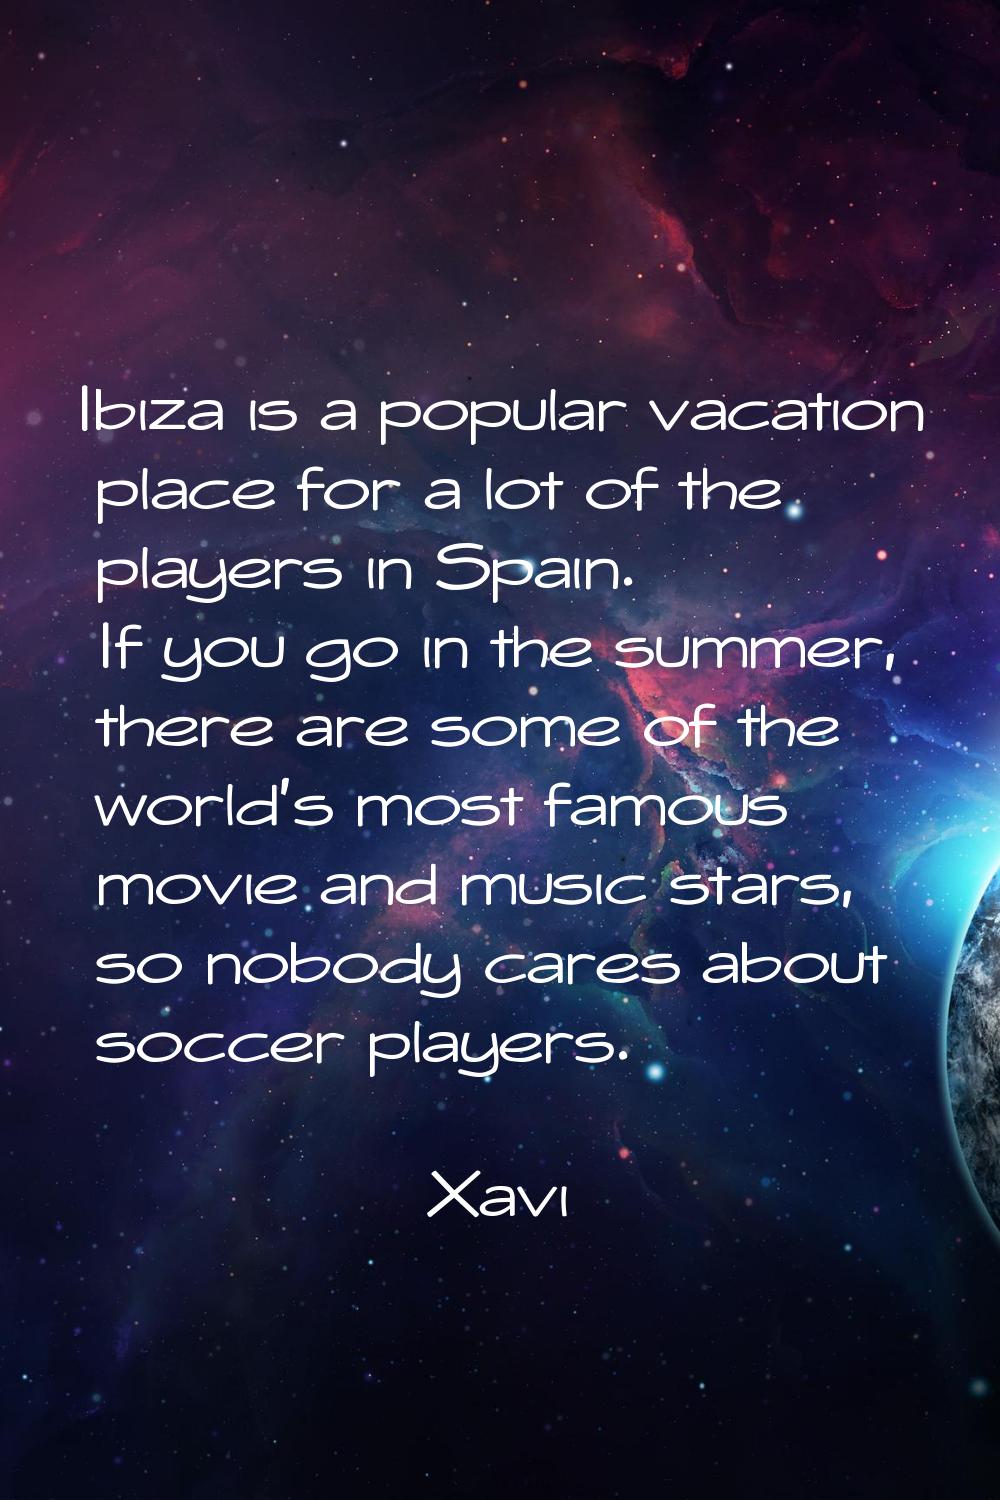 Ibiza is a popular vacation place for a lot of the players in Spain. If you go in the summer, there